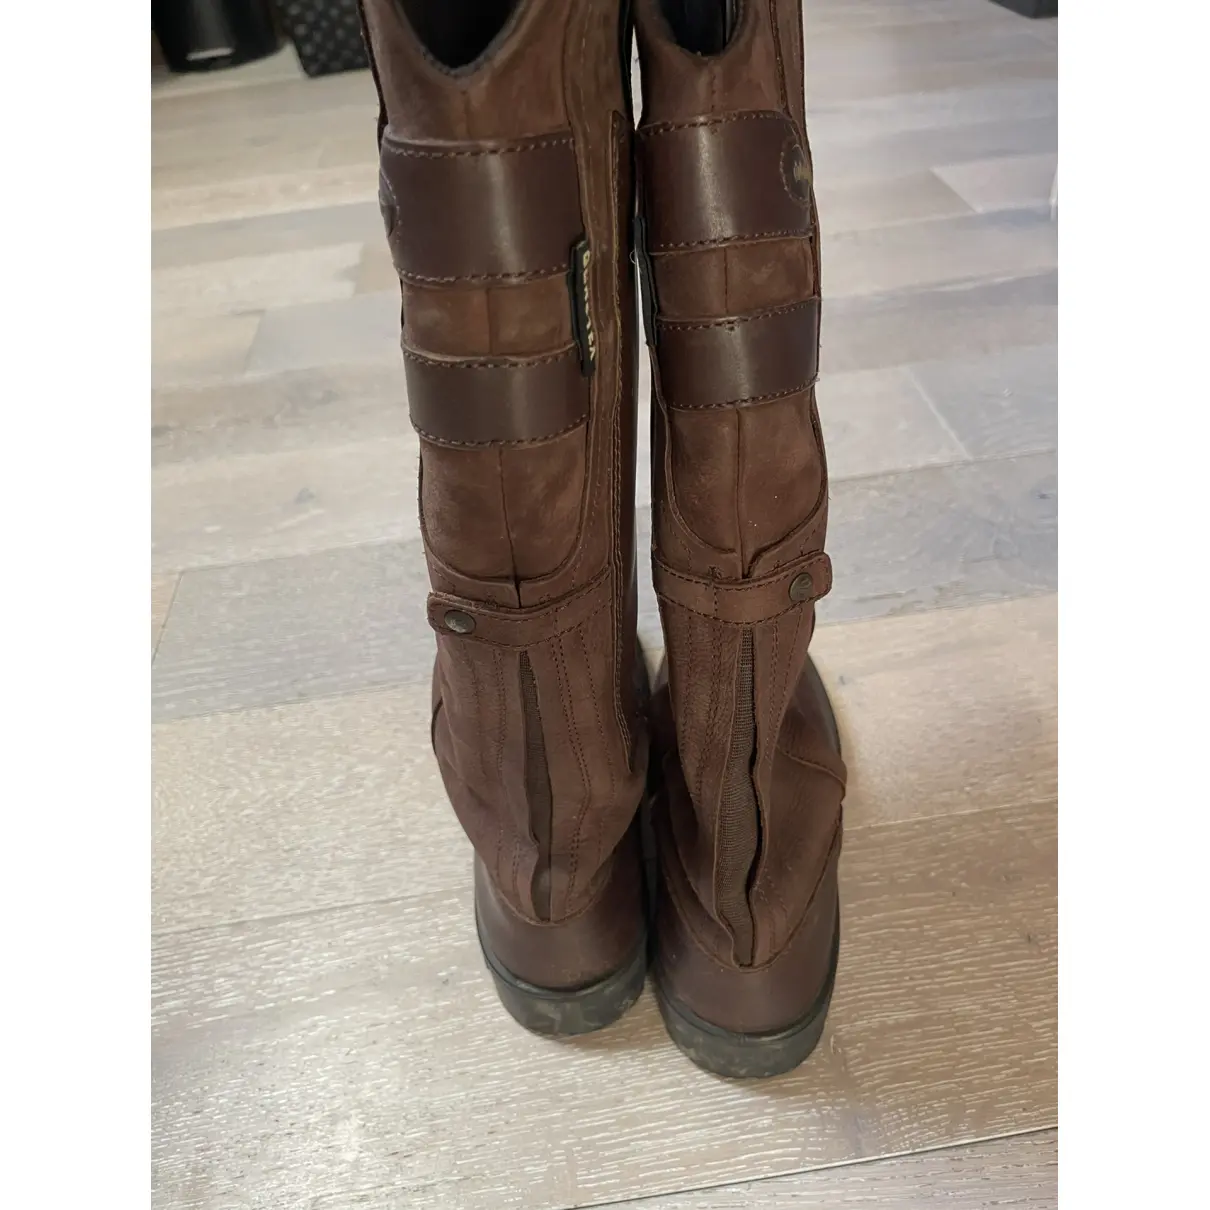 Buy Dubarry Leather boots online